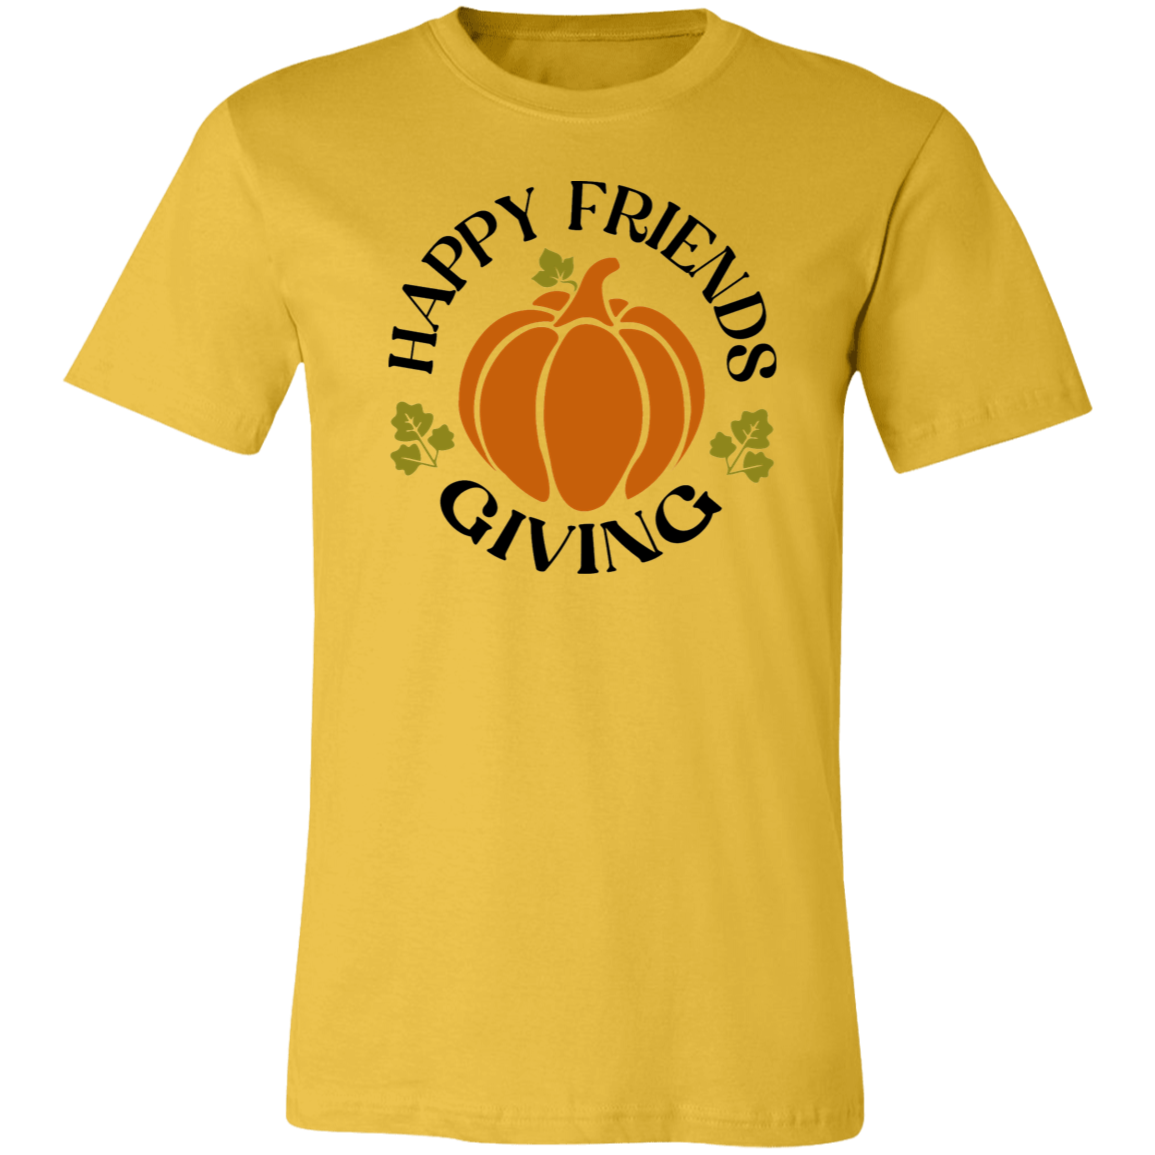 Happy Friends Giving Shirt